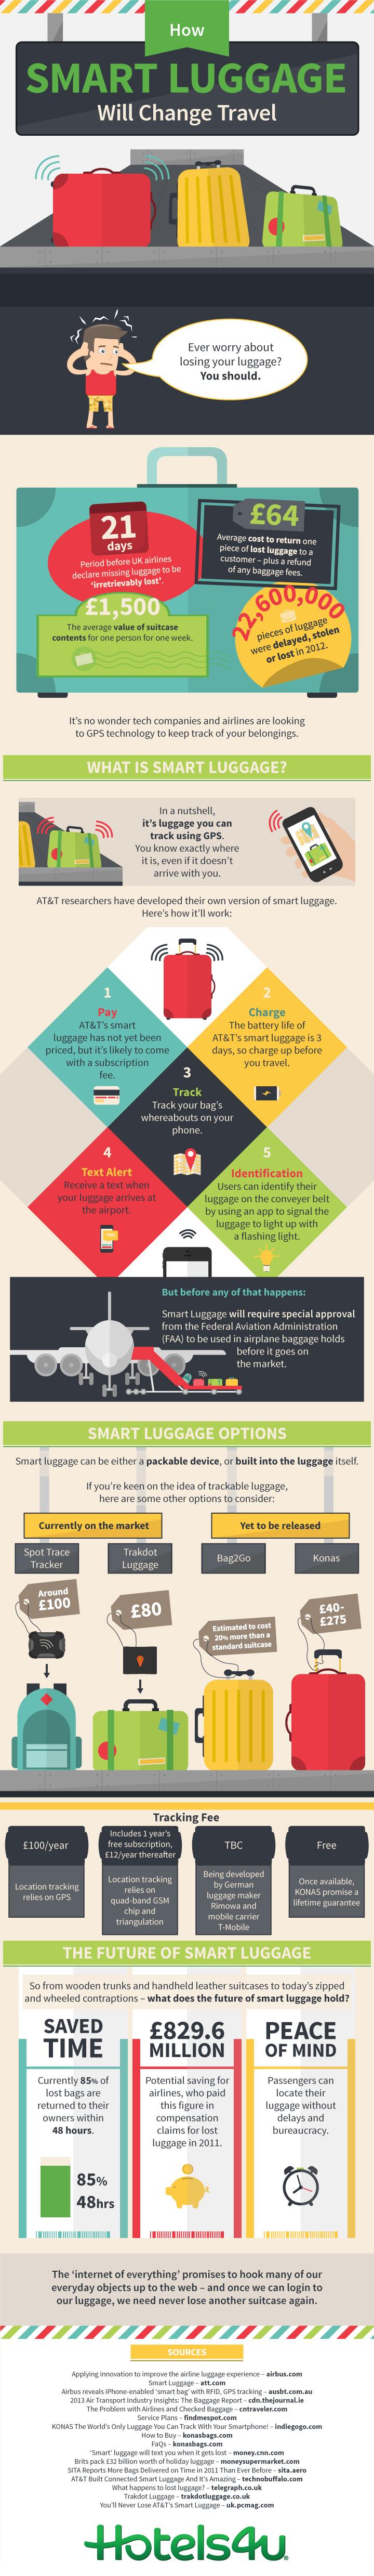 how-smart-luggage-will-change-travel-main